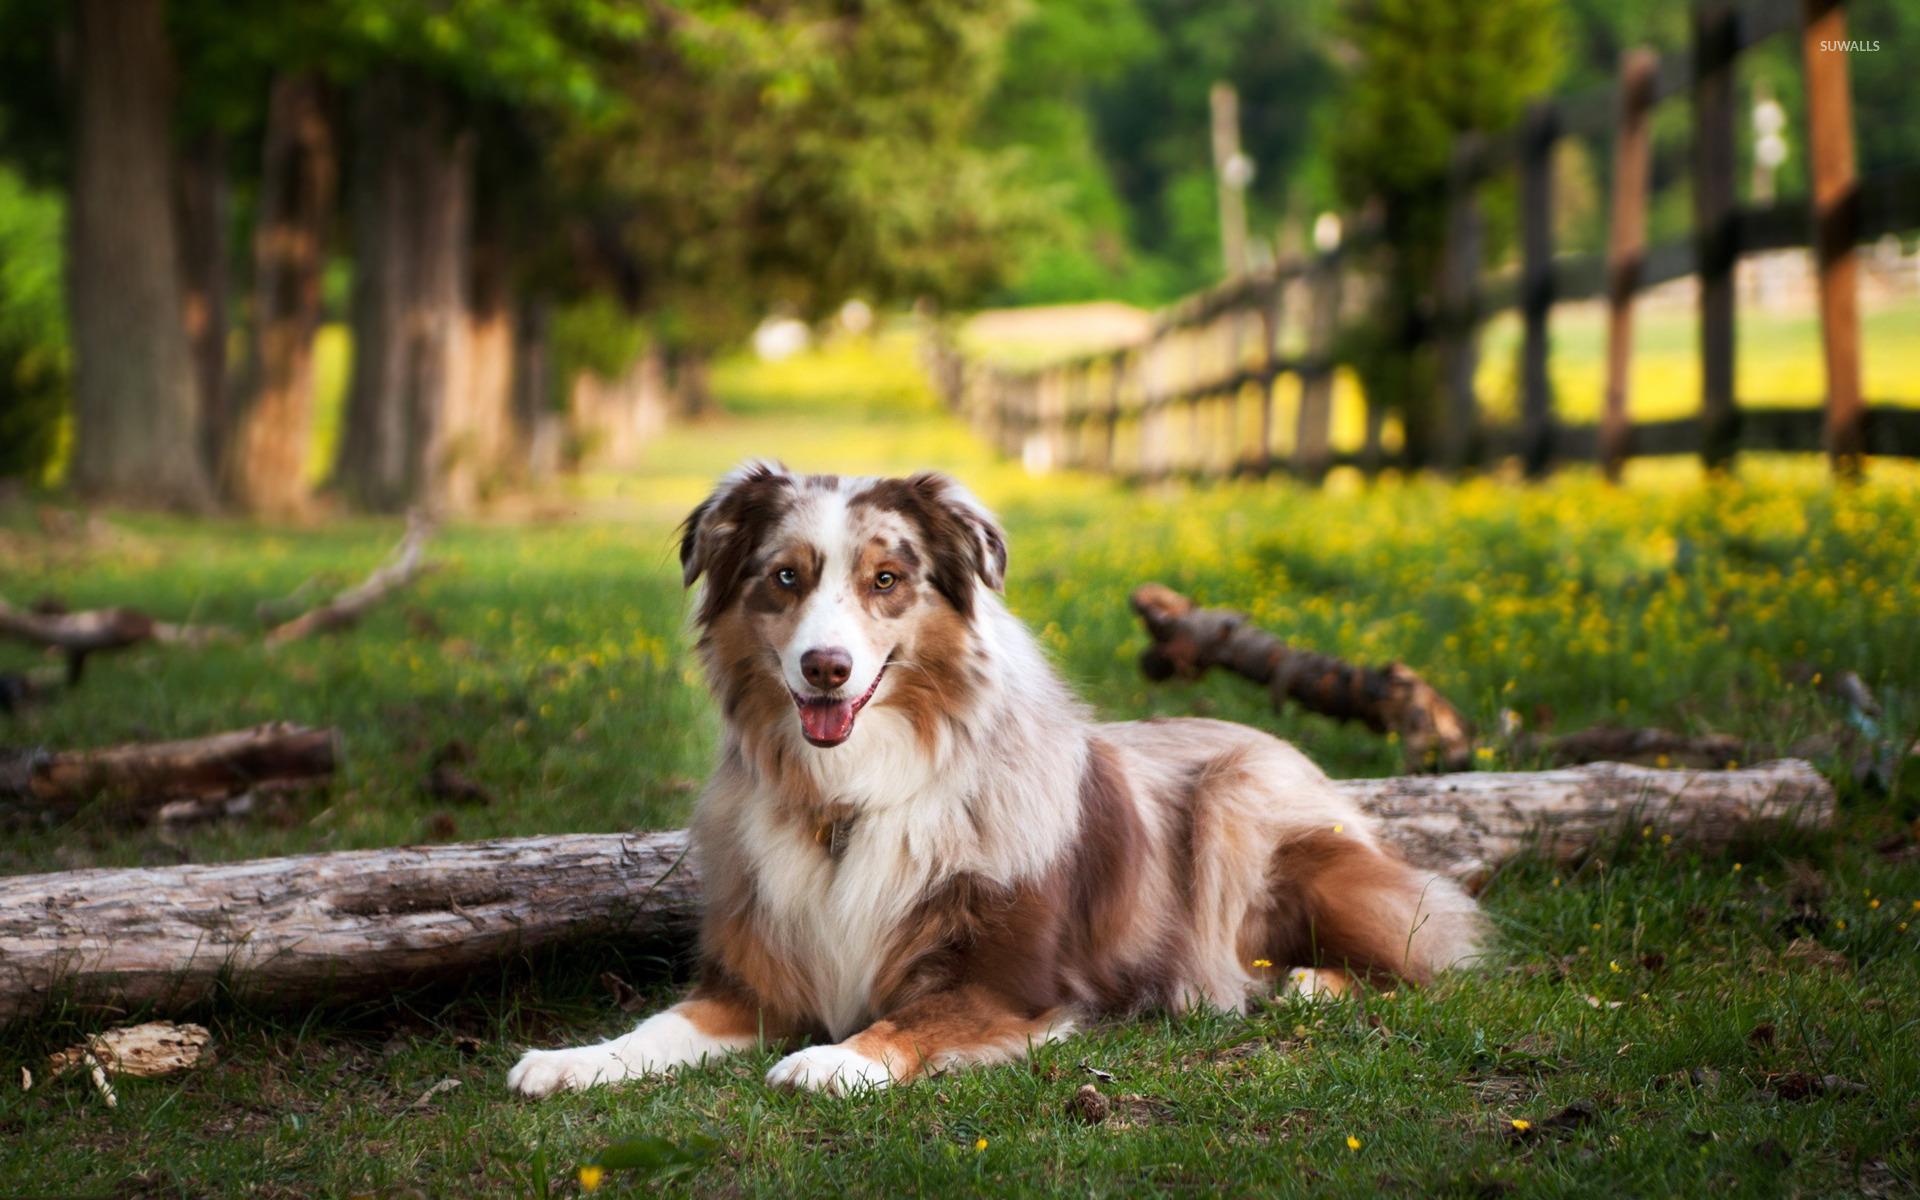 Download wallpapers Aussie, farm, Australian Shepherd, pets, dogs, Australian Shepherd Dog, Aussie Dog for desktop with resolution 1920x1200. High Quality HD pictures wallpapers